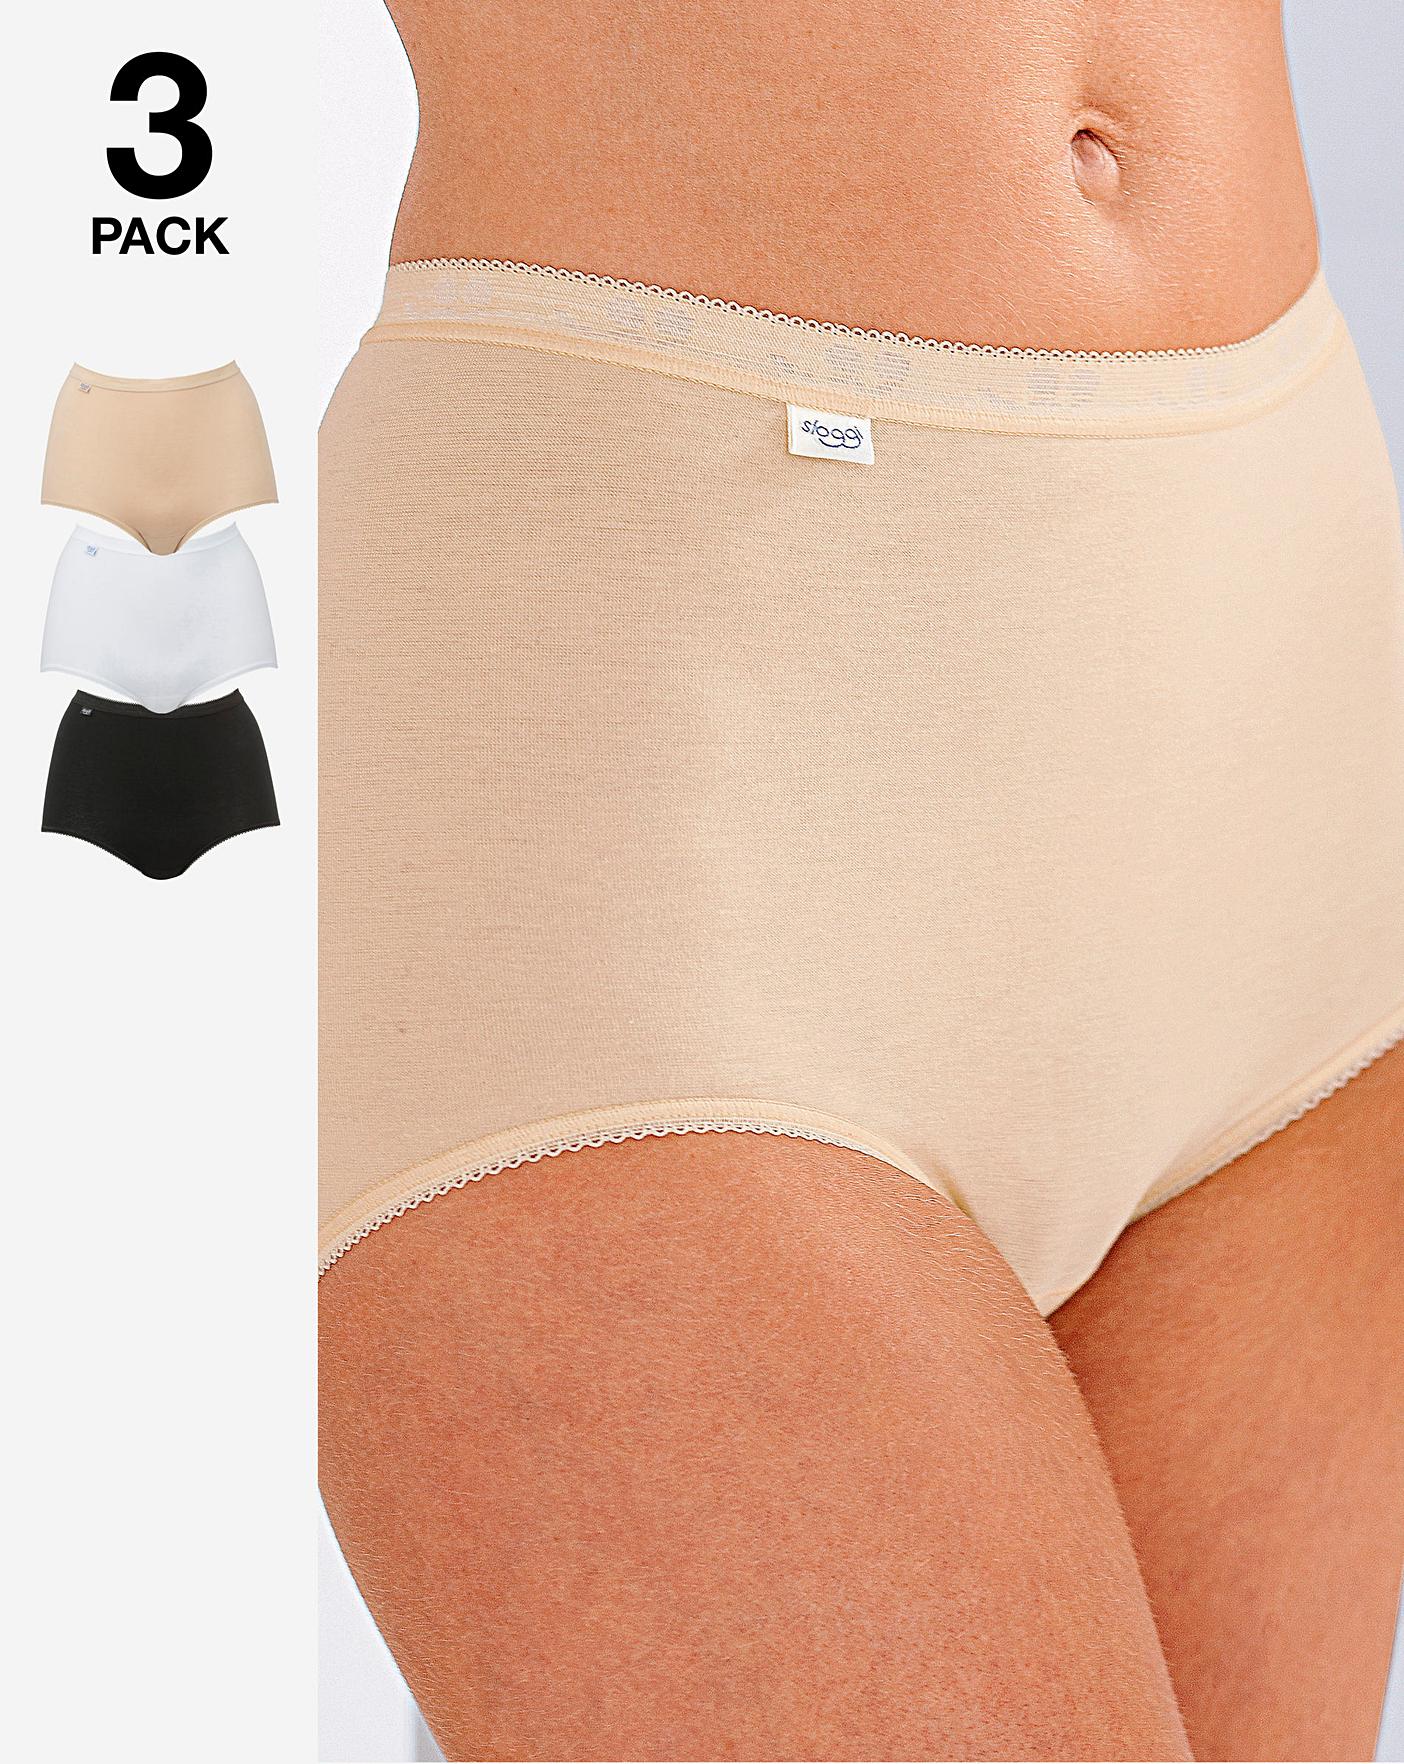 Sloggi Knickers Underwear  Lingerie Outlet Store Free UK Delivery